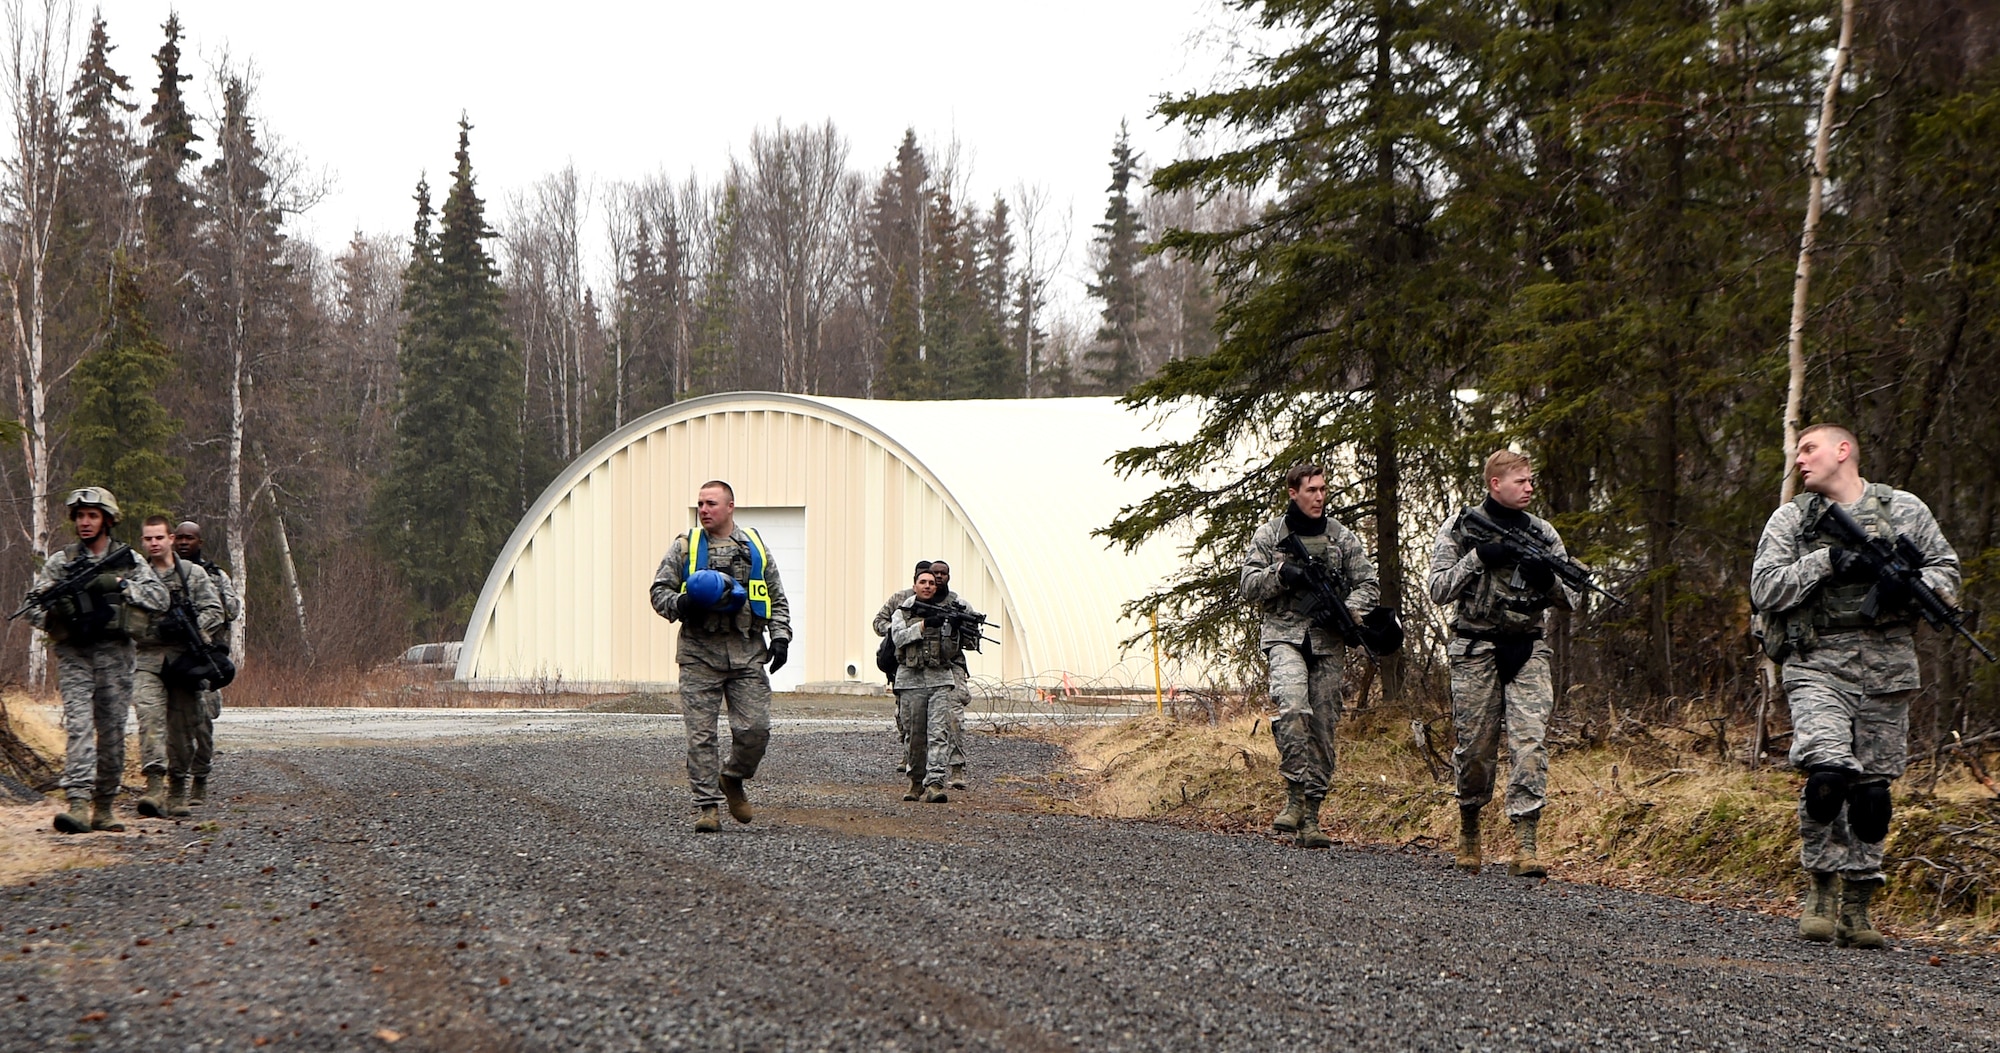 Members of the 673rd Security Forces Squadron during a training exercise at Joint Base Elmendorf-Richardson, Alaska, April 27, 2015. A new Air Force medical unit called an Operational Support Team is embedded with the base guard squadron to improve unit health and readiness by studying and addressing issues specific to the squadron. (U.S. Air Force photo by Staff Sgt. Sheila deVera)